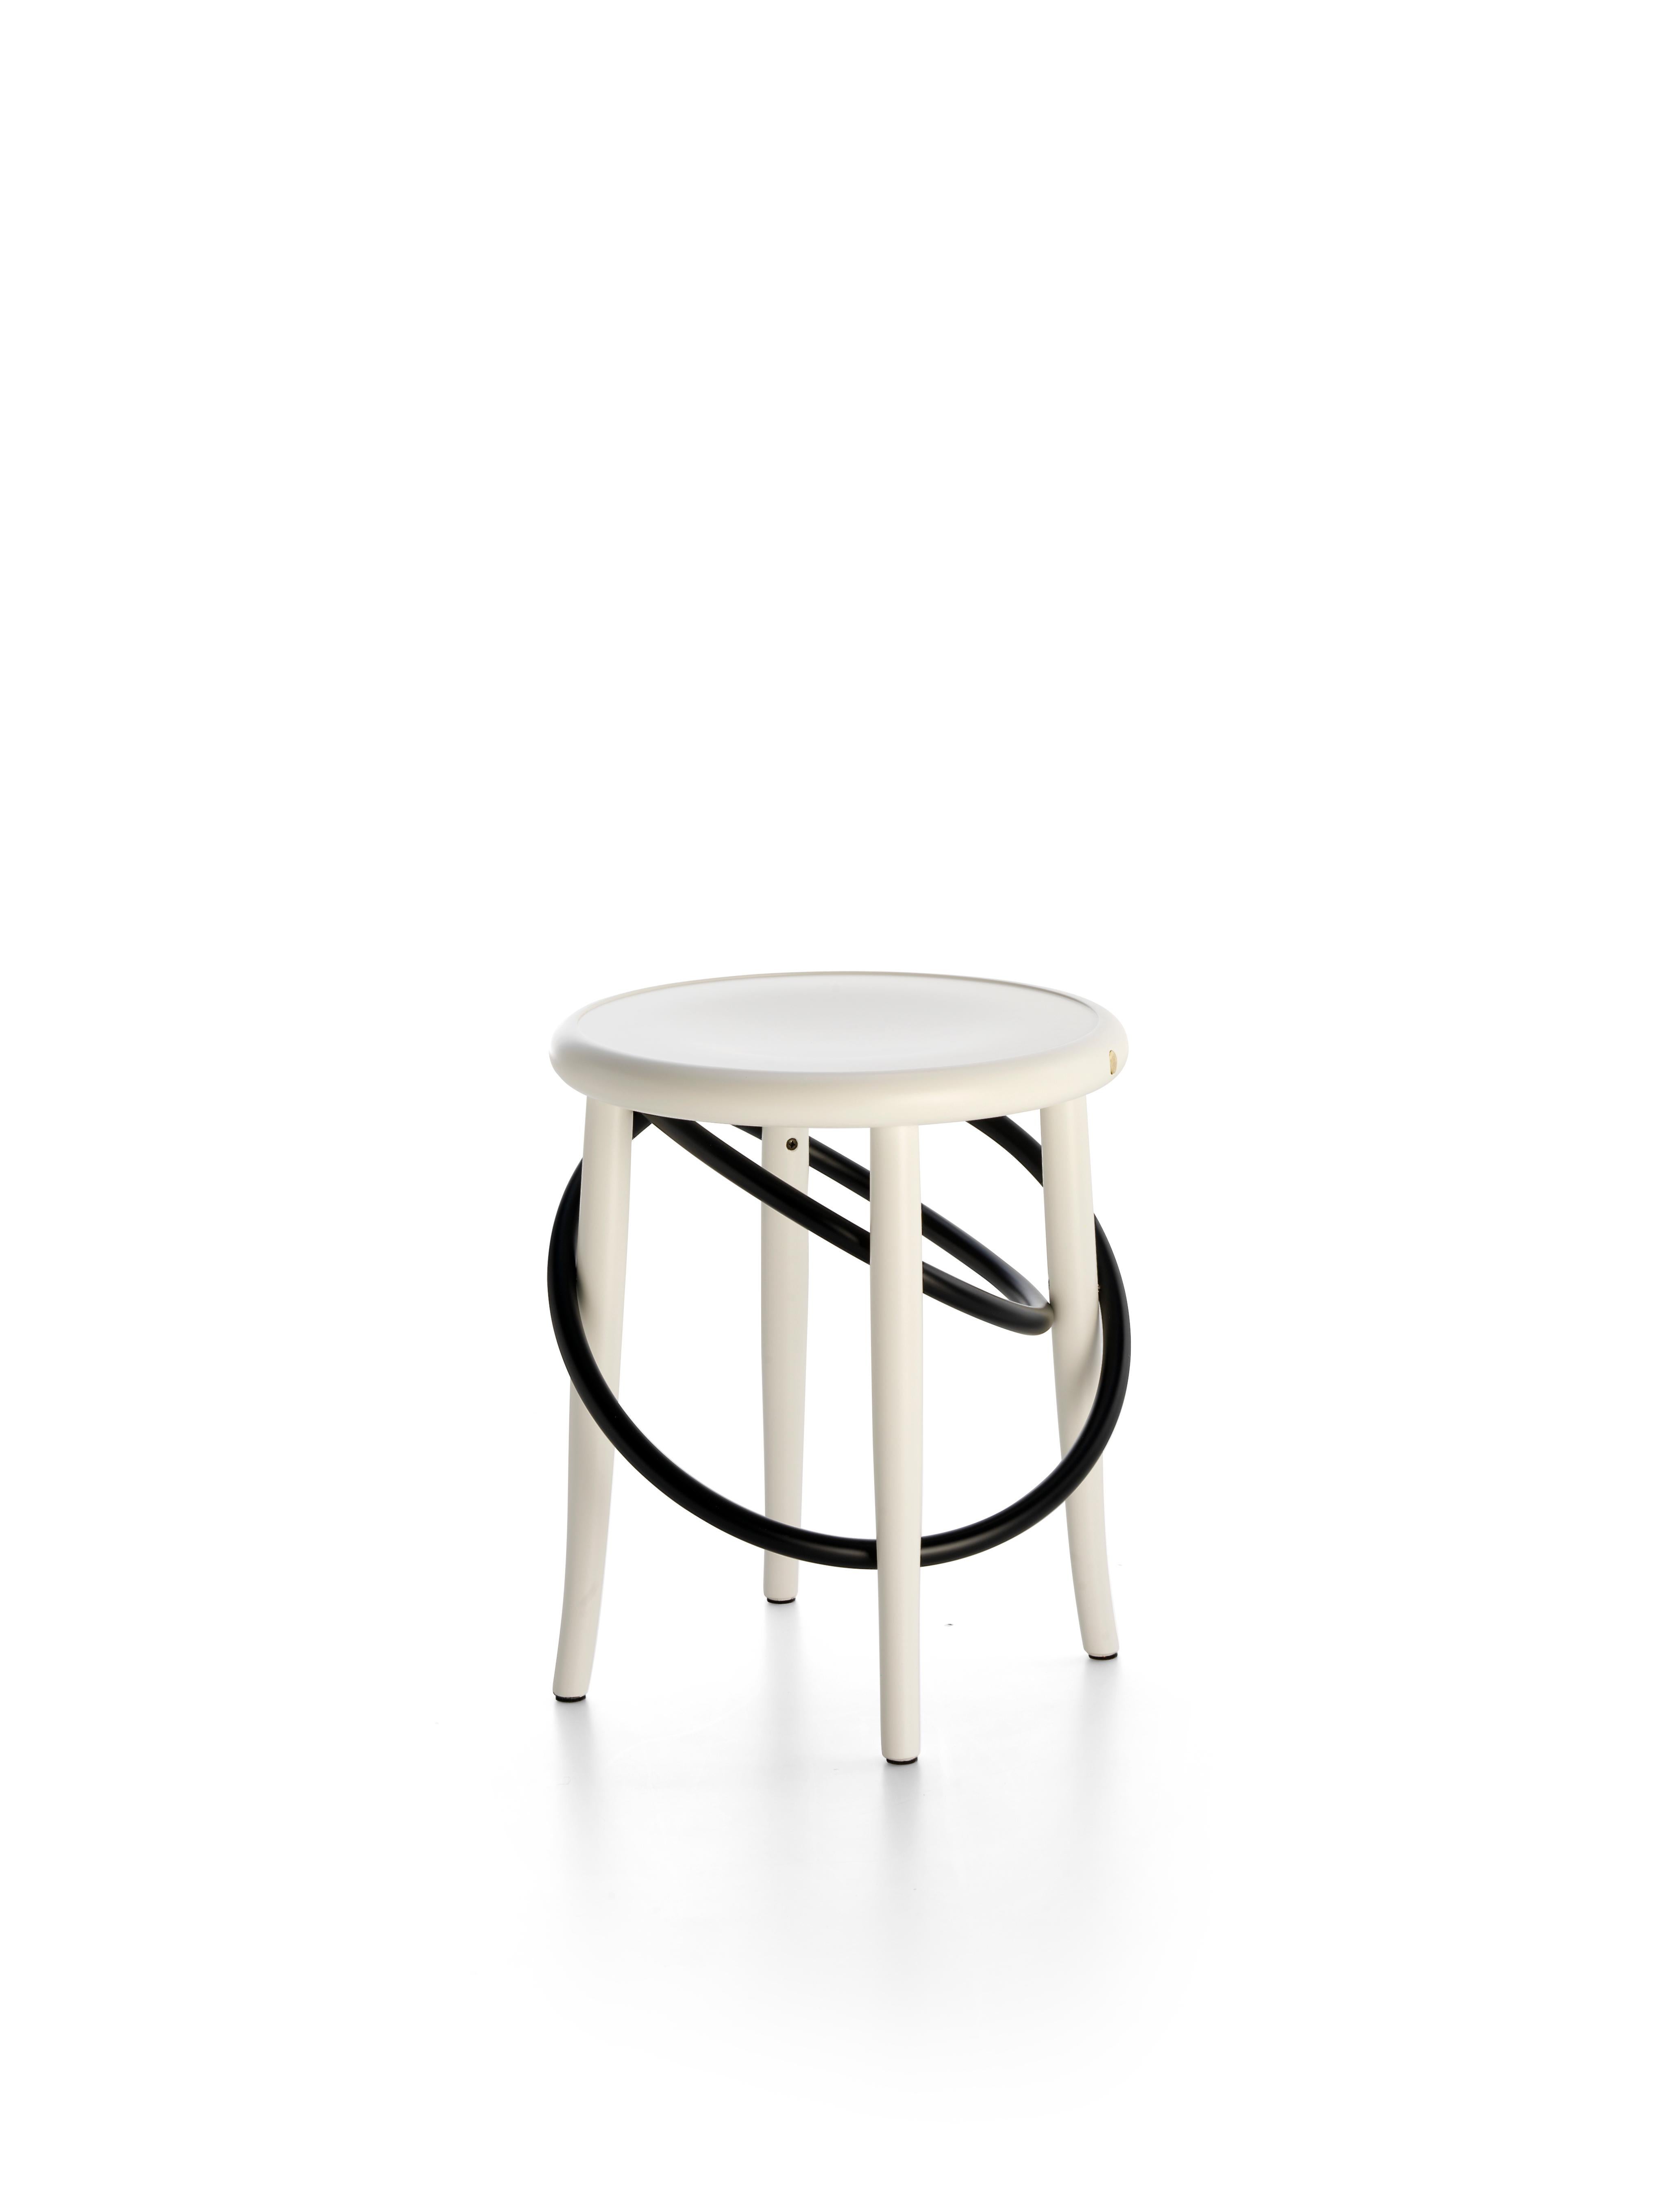 Modern Gebrüder Thonet Vienna GmbH Cirque Low Stool in White with Black Rings For Sale